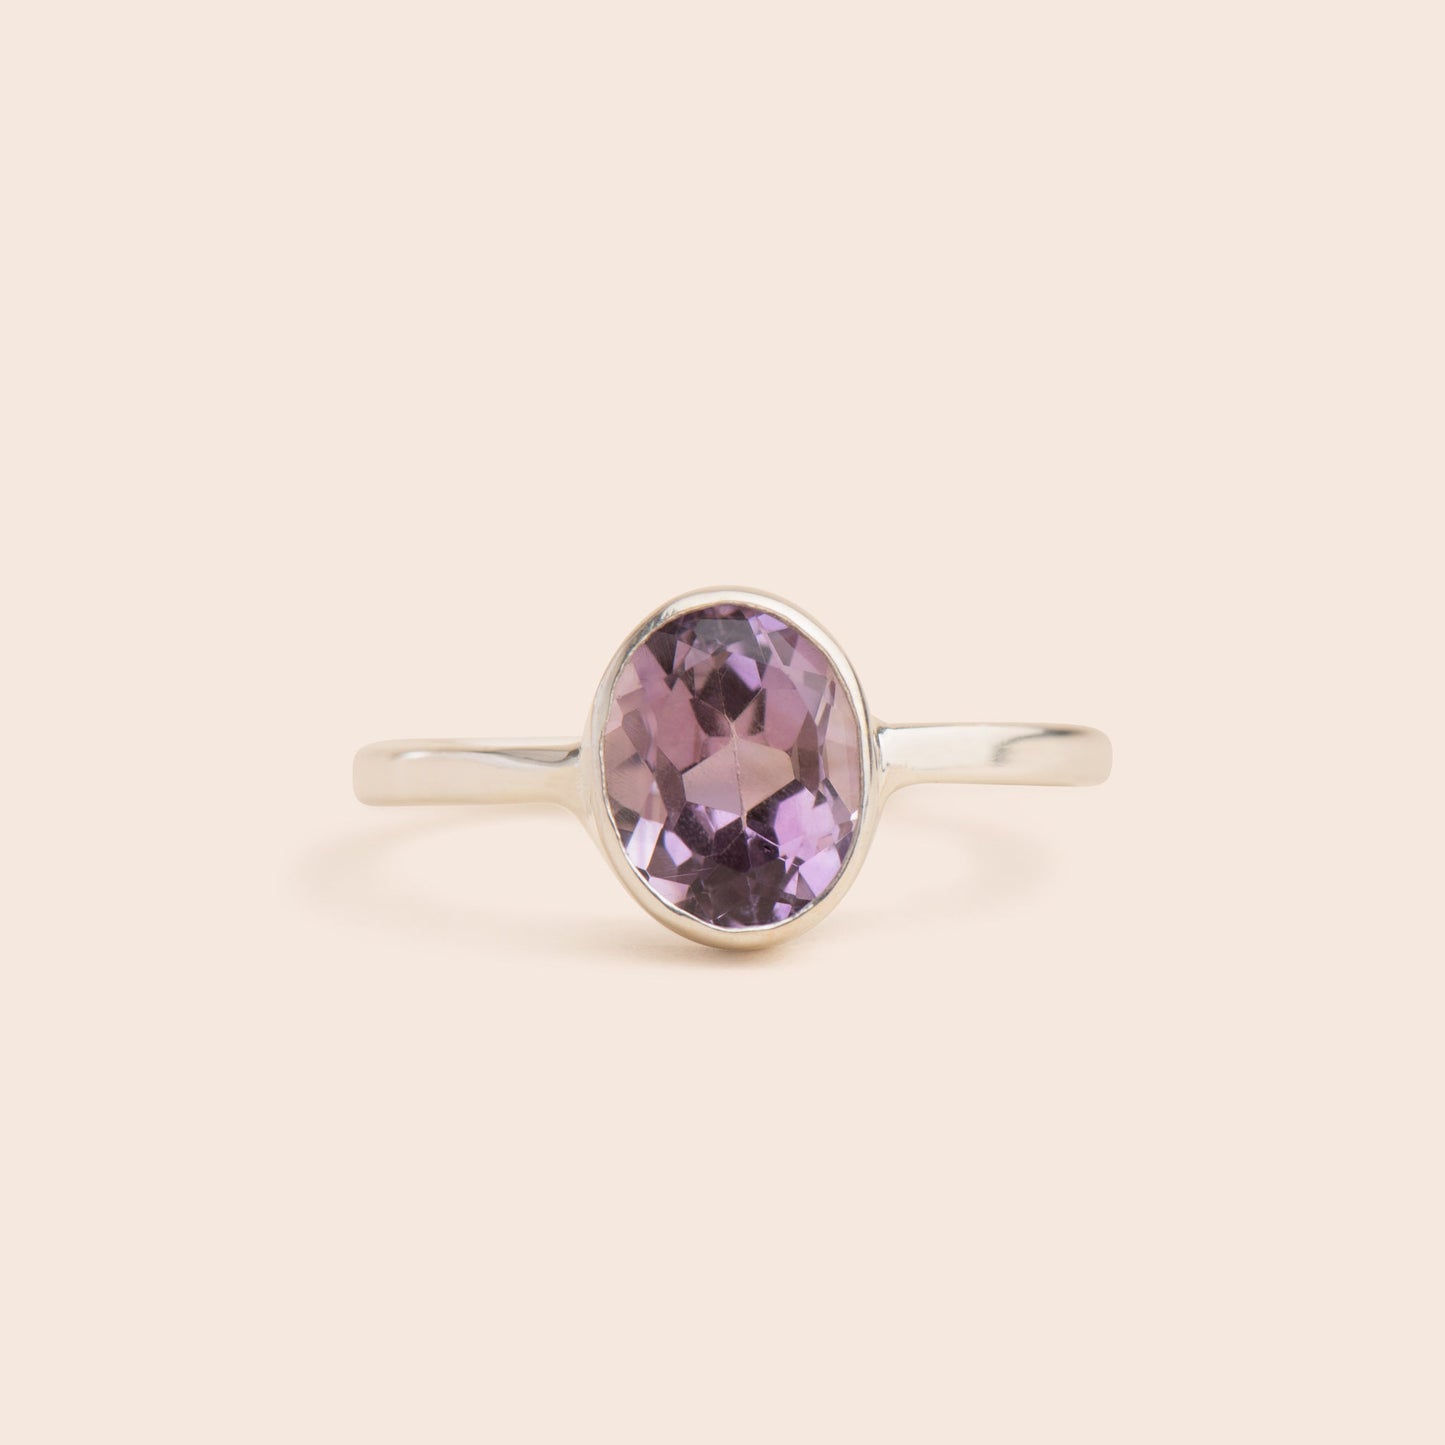 "Shop the stunning amethyst oval sterling silver ring at [company name]. Add a touch of sophistication to your look with this elegant and affordable jewelry piece."